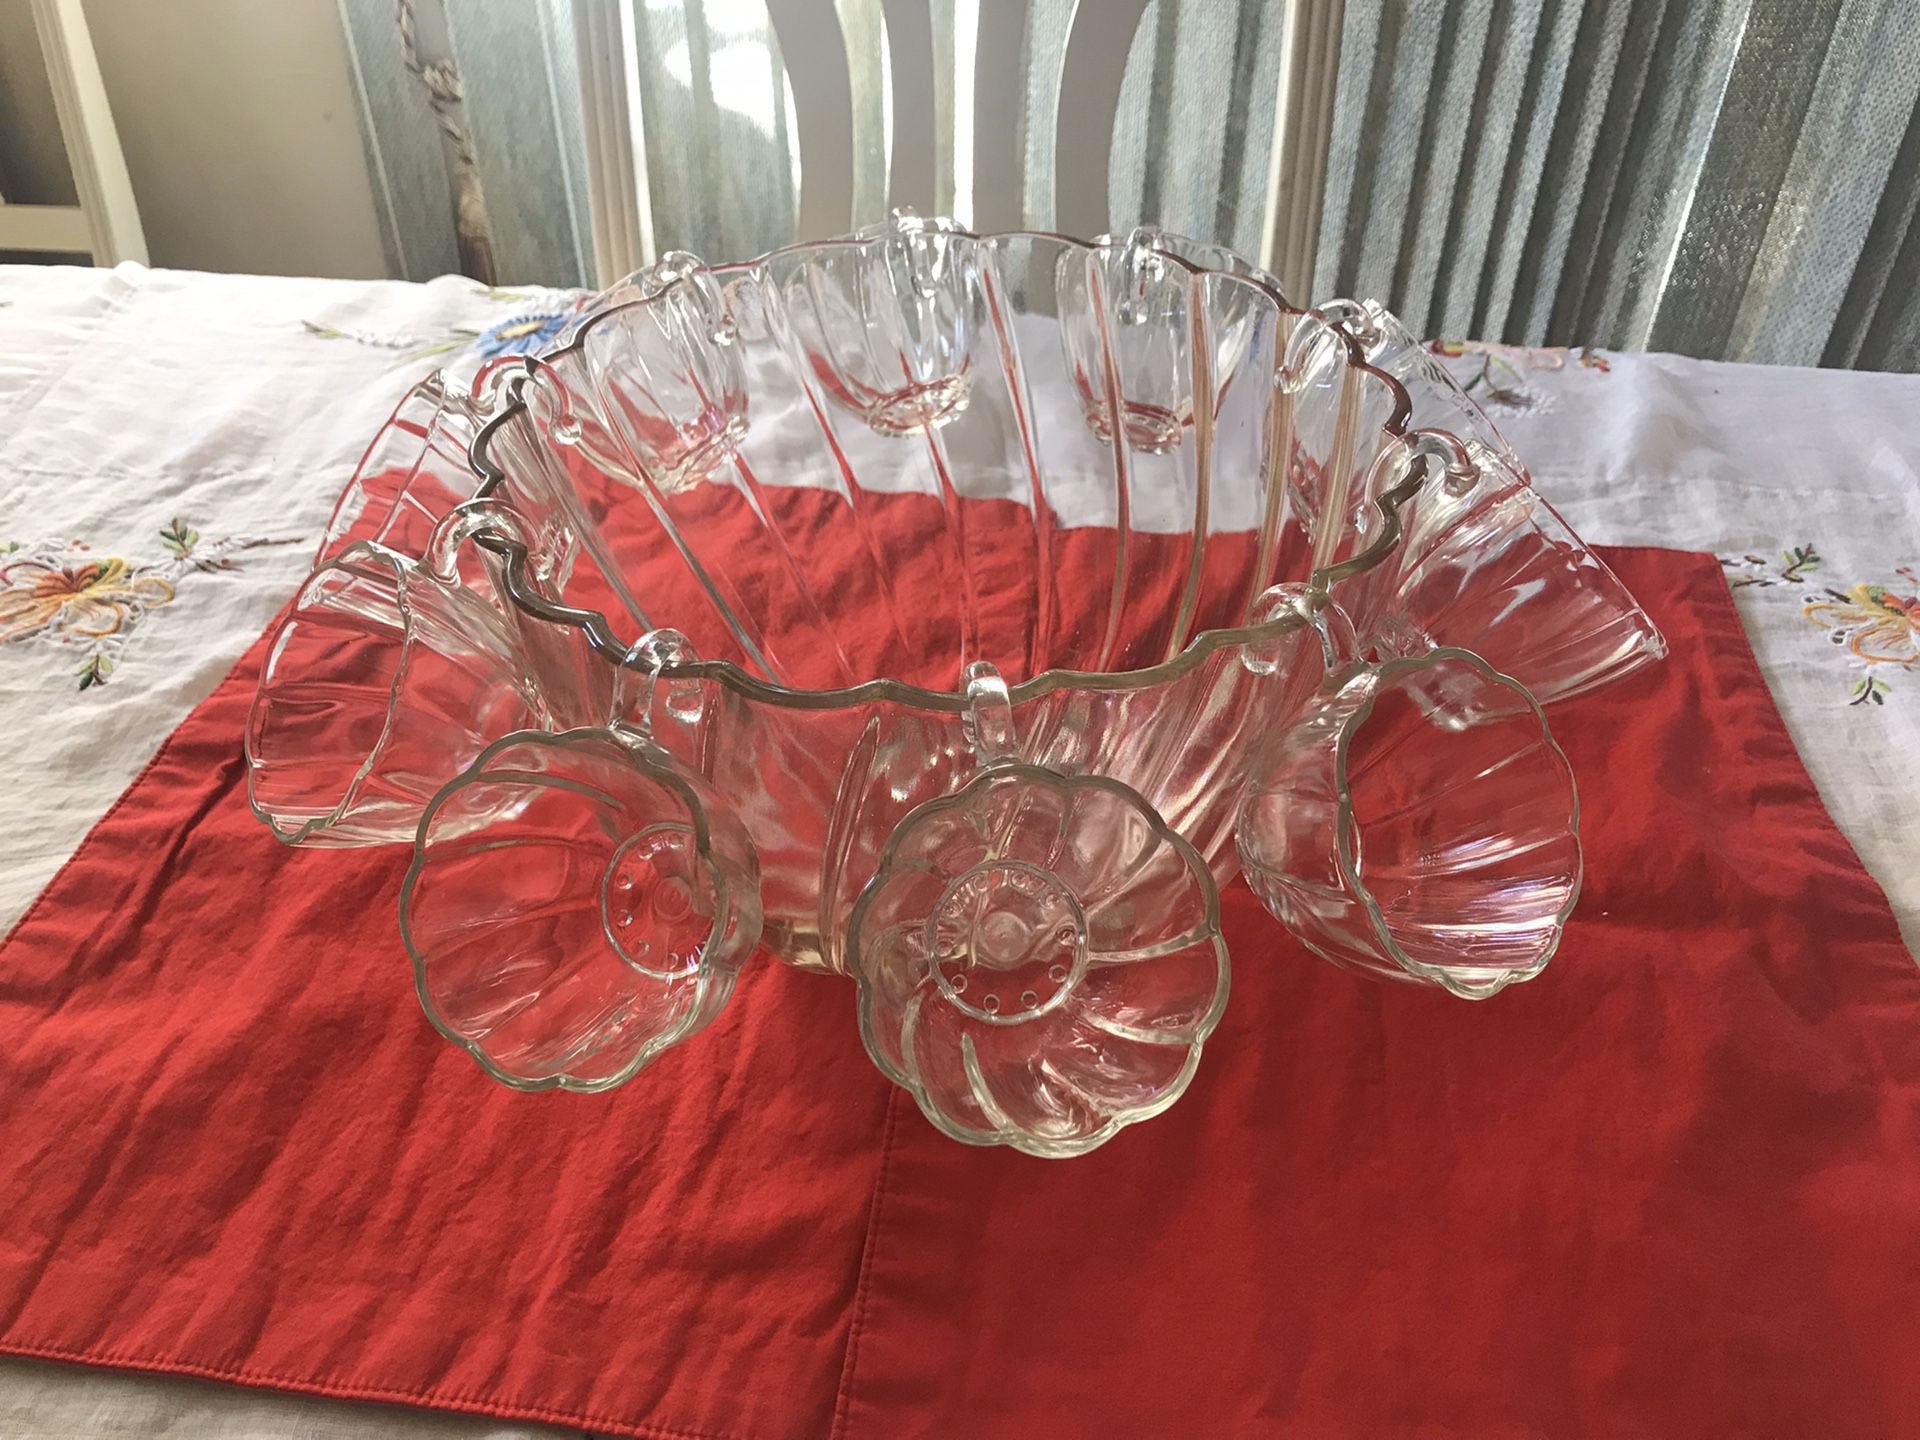 Vintage glass punch bowl with matching unique cups